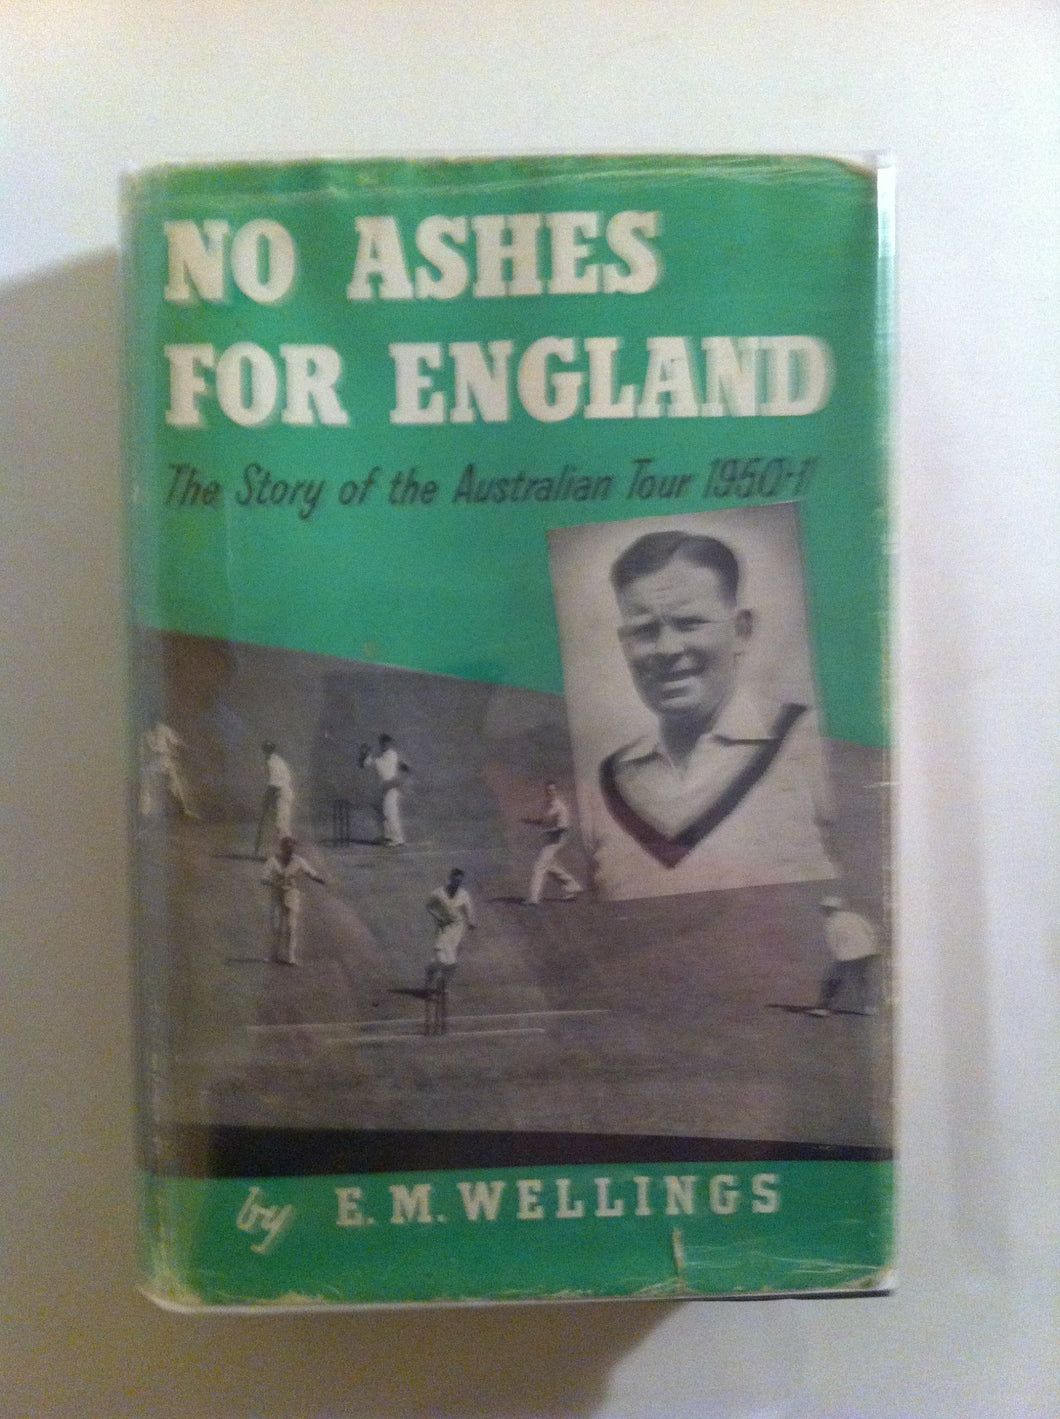 No Ashes For England - The Story Of The Australian Tour 1950-1. [Hardcover] Wellings E M